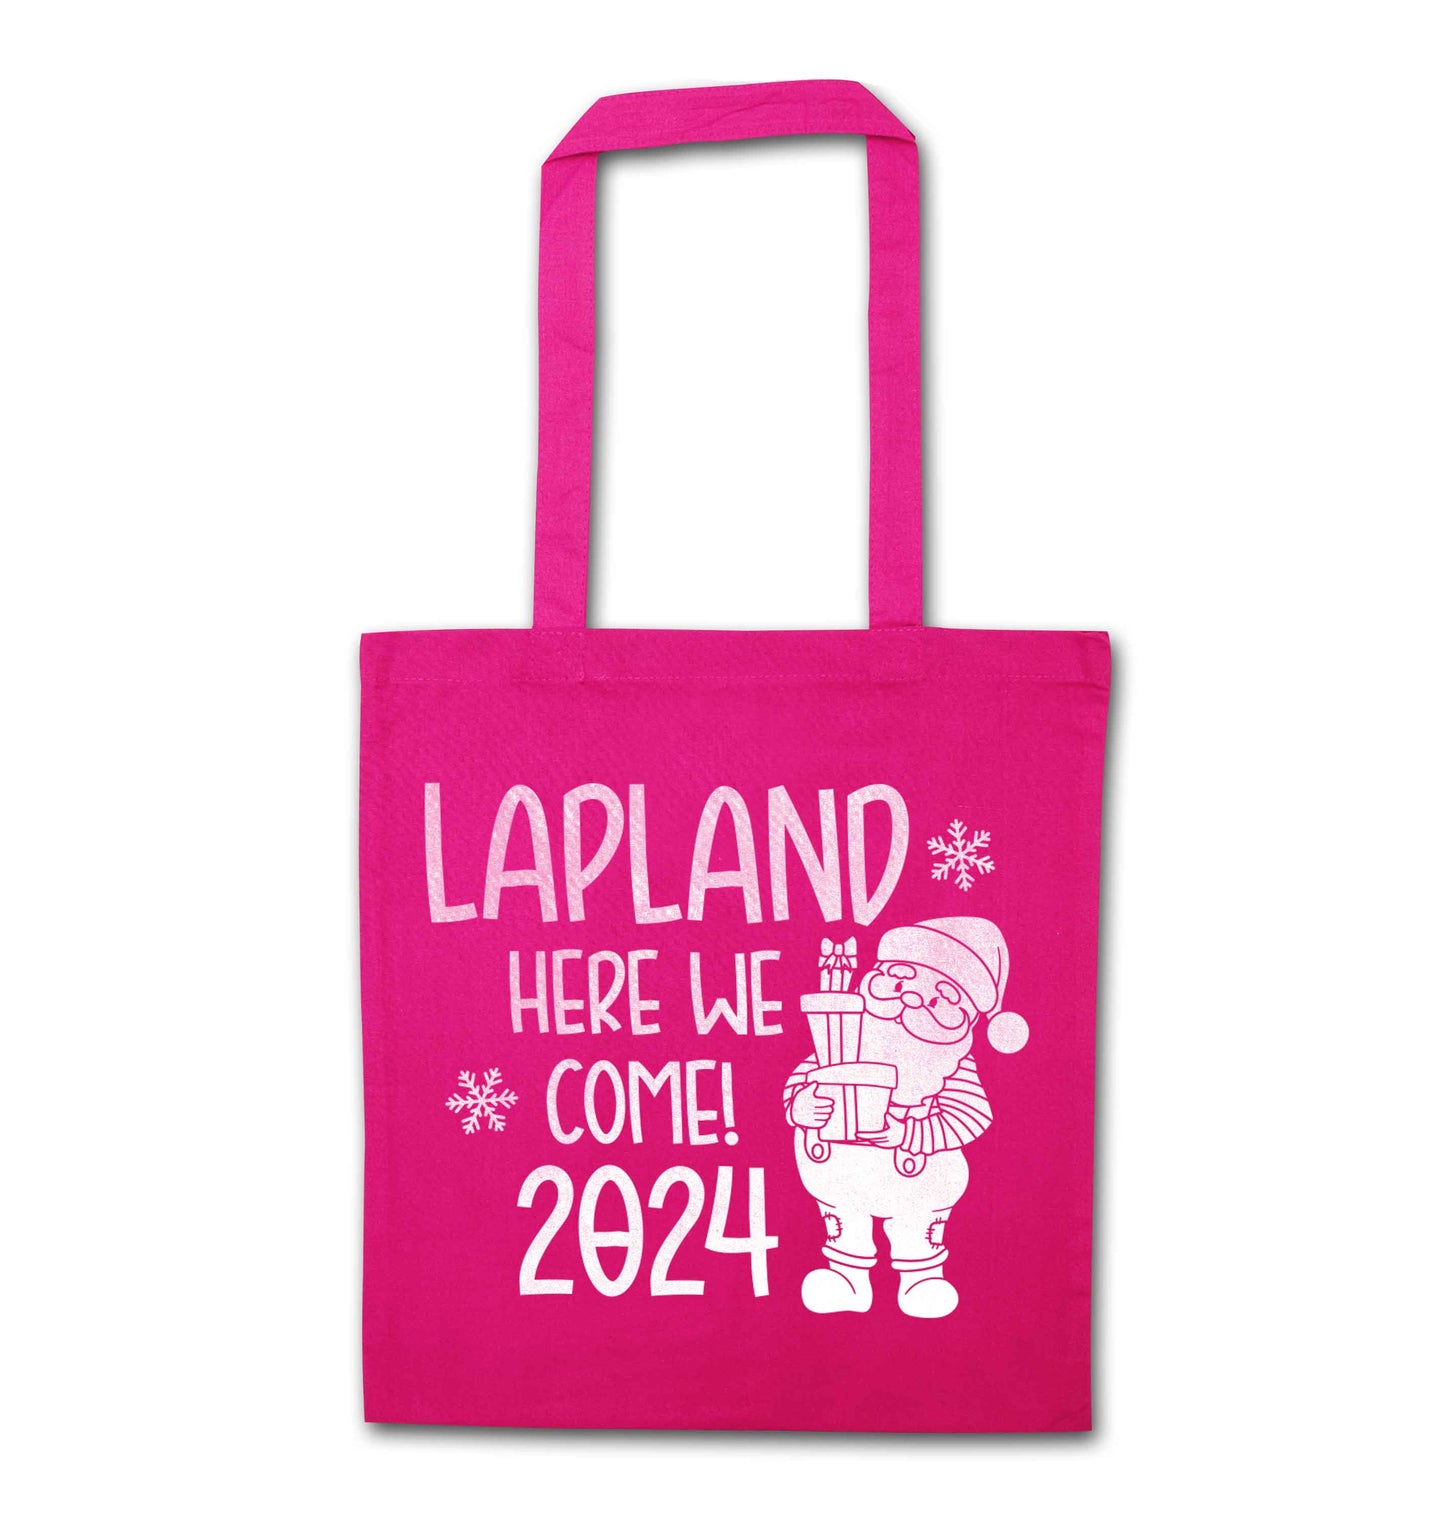 Lapland here we come pink tote bag